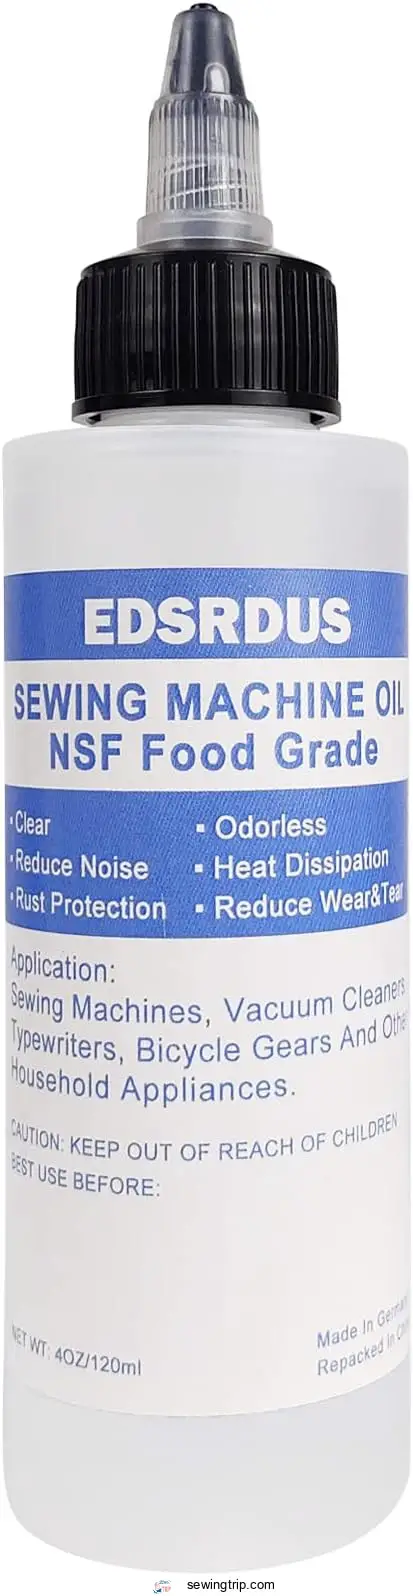 EDSRDUS 4 Ounces Sewing Machine Oil, Colorless Odorless Non-toxic Machine Oil for Lubricating All Sewing